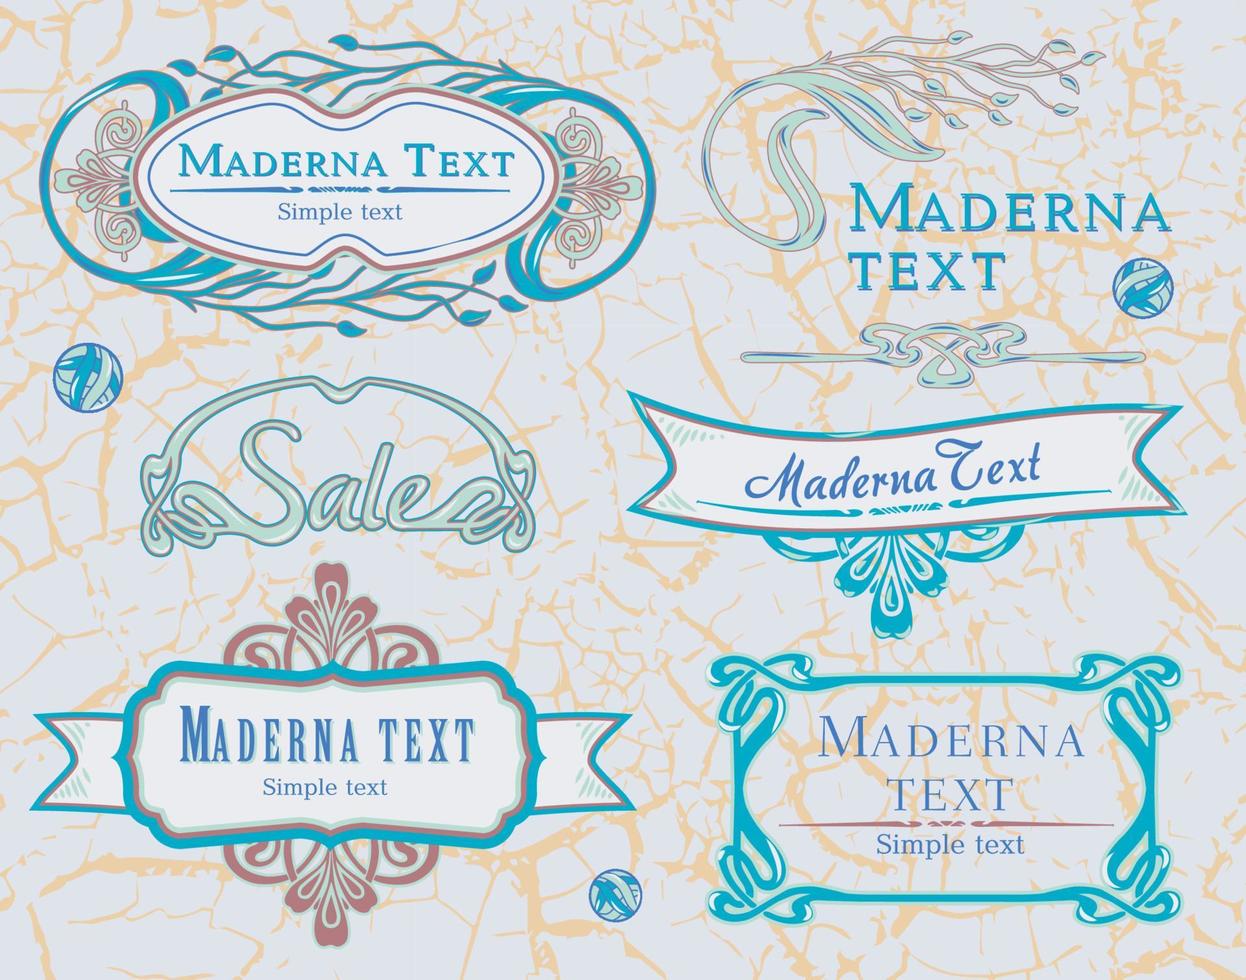 vector set calligraphic design elements and decoration, Premium Quality and Satisfaction Guarantee Label collection with in retro style in grey and blue tones